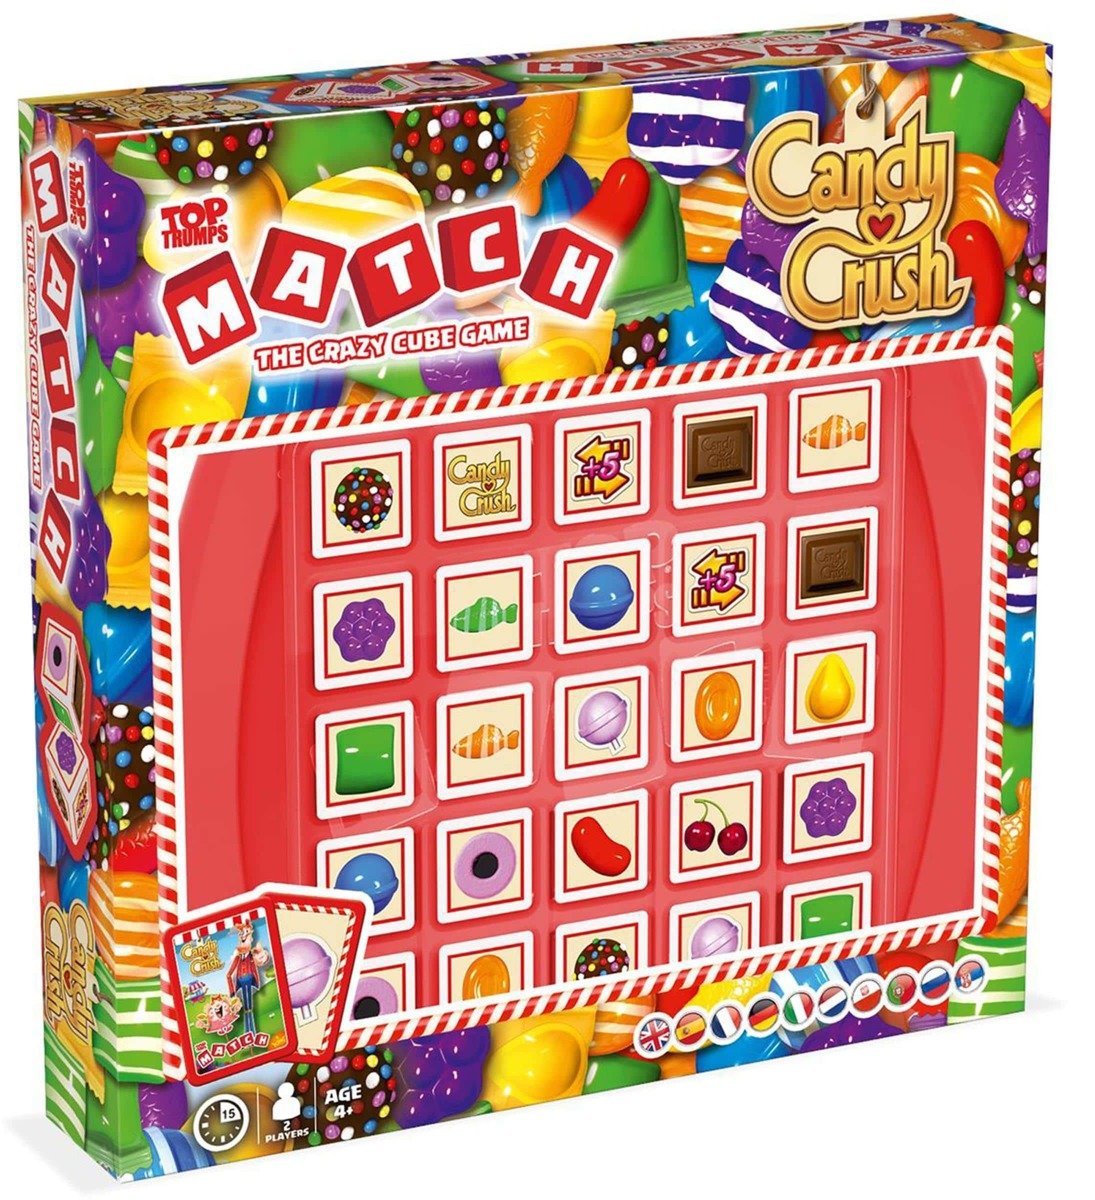 OUTLET Winning Moves TOP TRUMPS Match Candy Crush